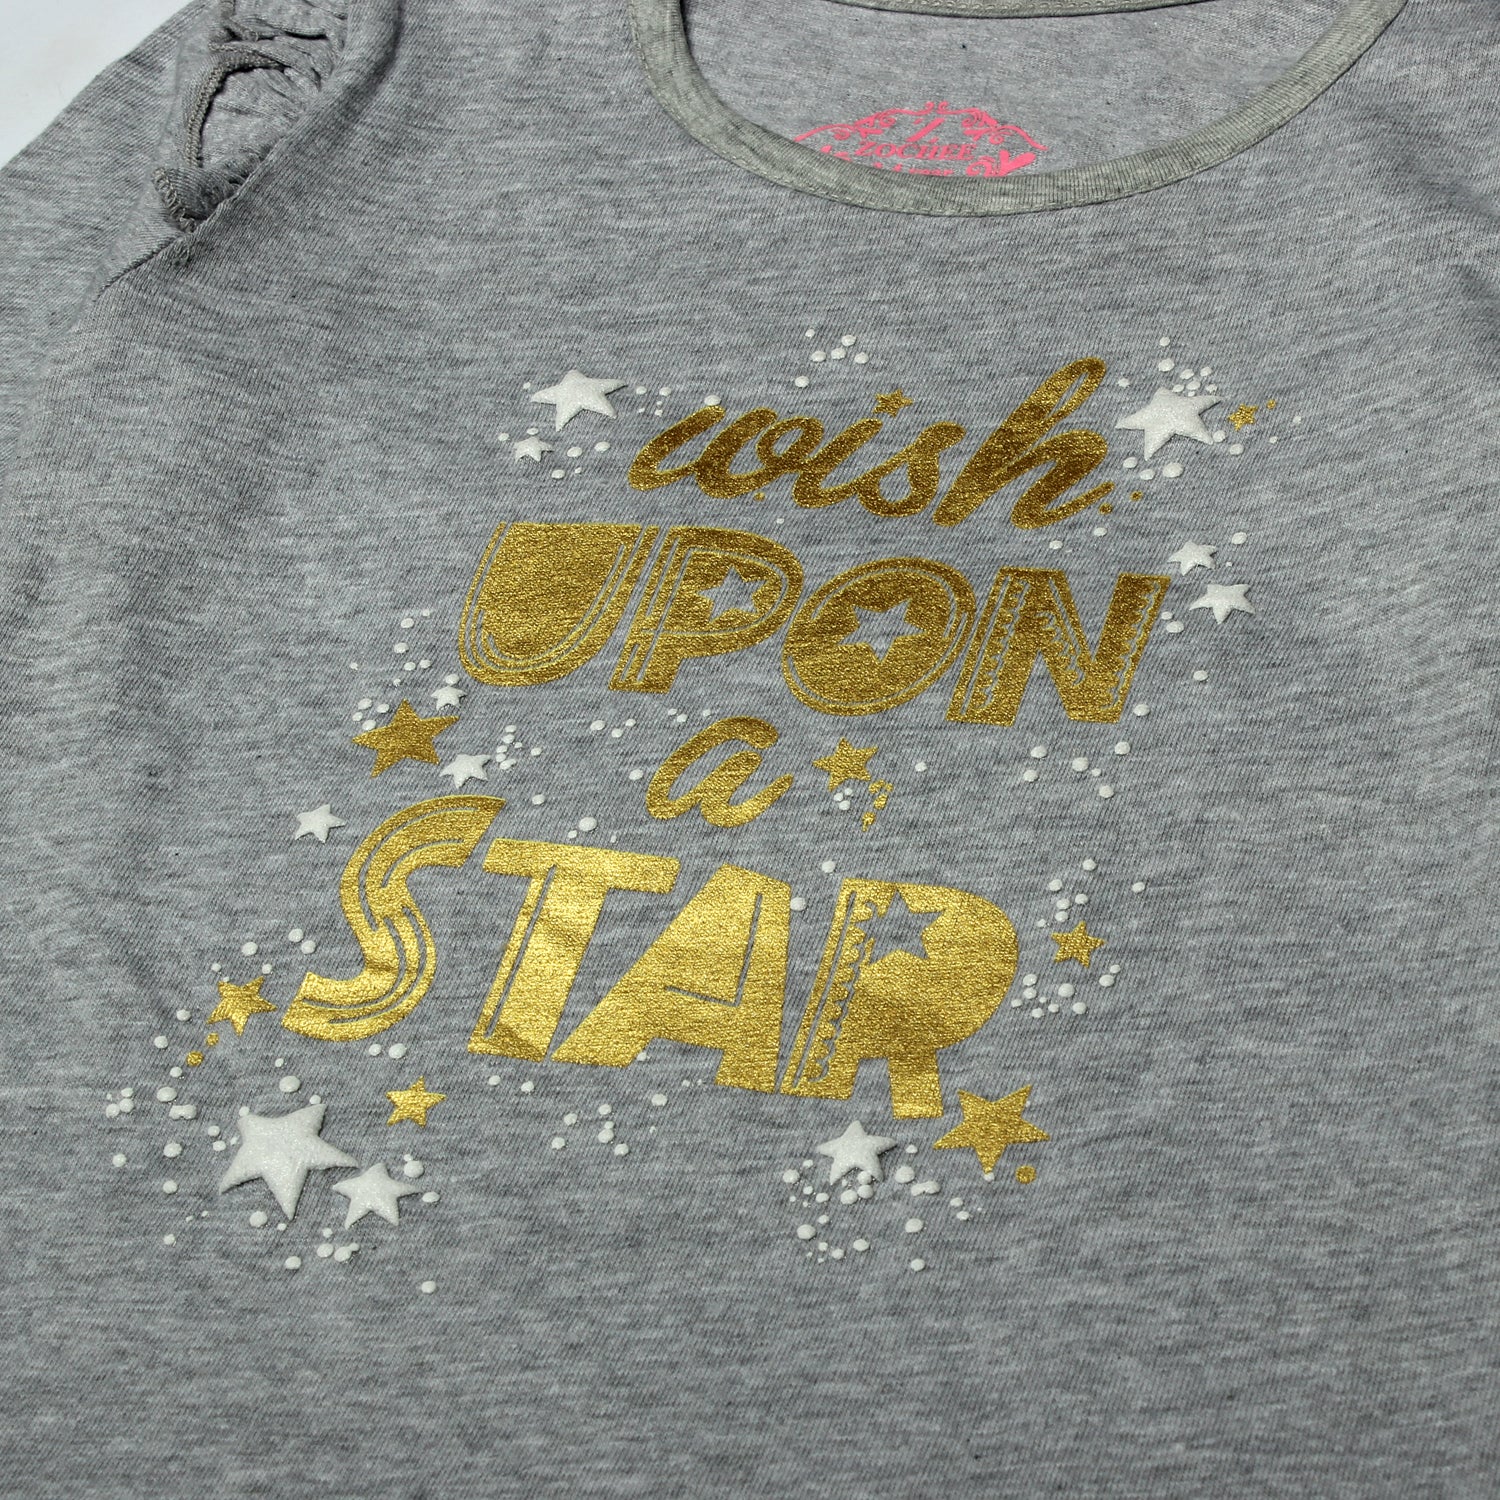 GREY FULL SLEEVES WISH UPON A STAR PRINTED TOP FOR GIRLS